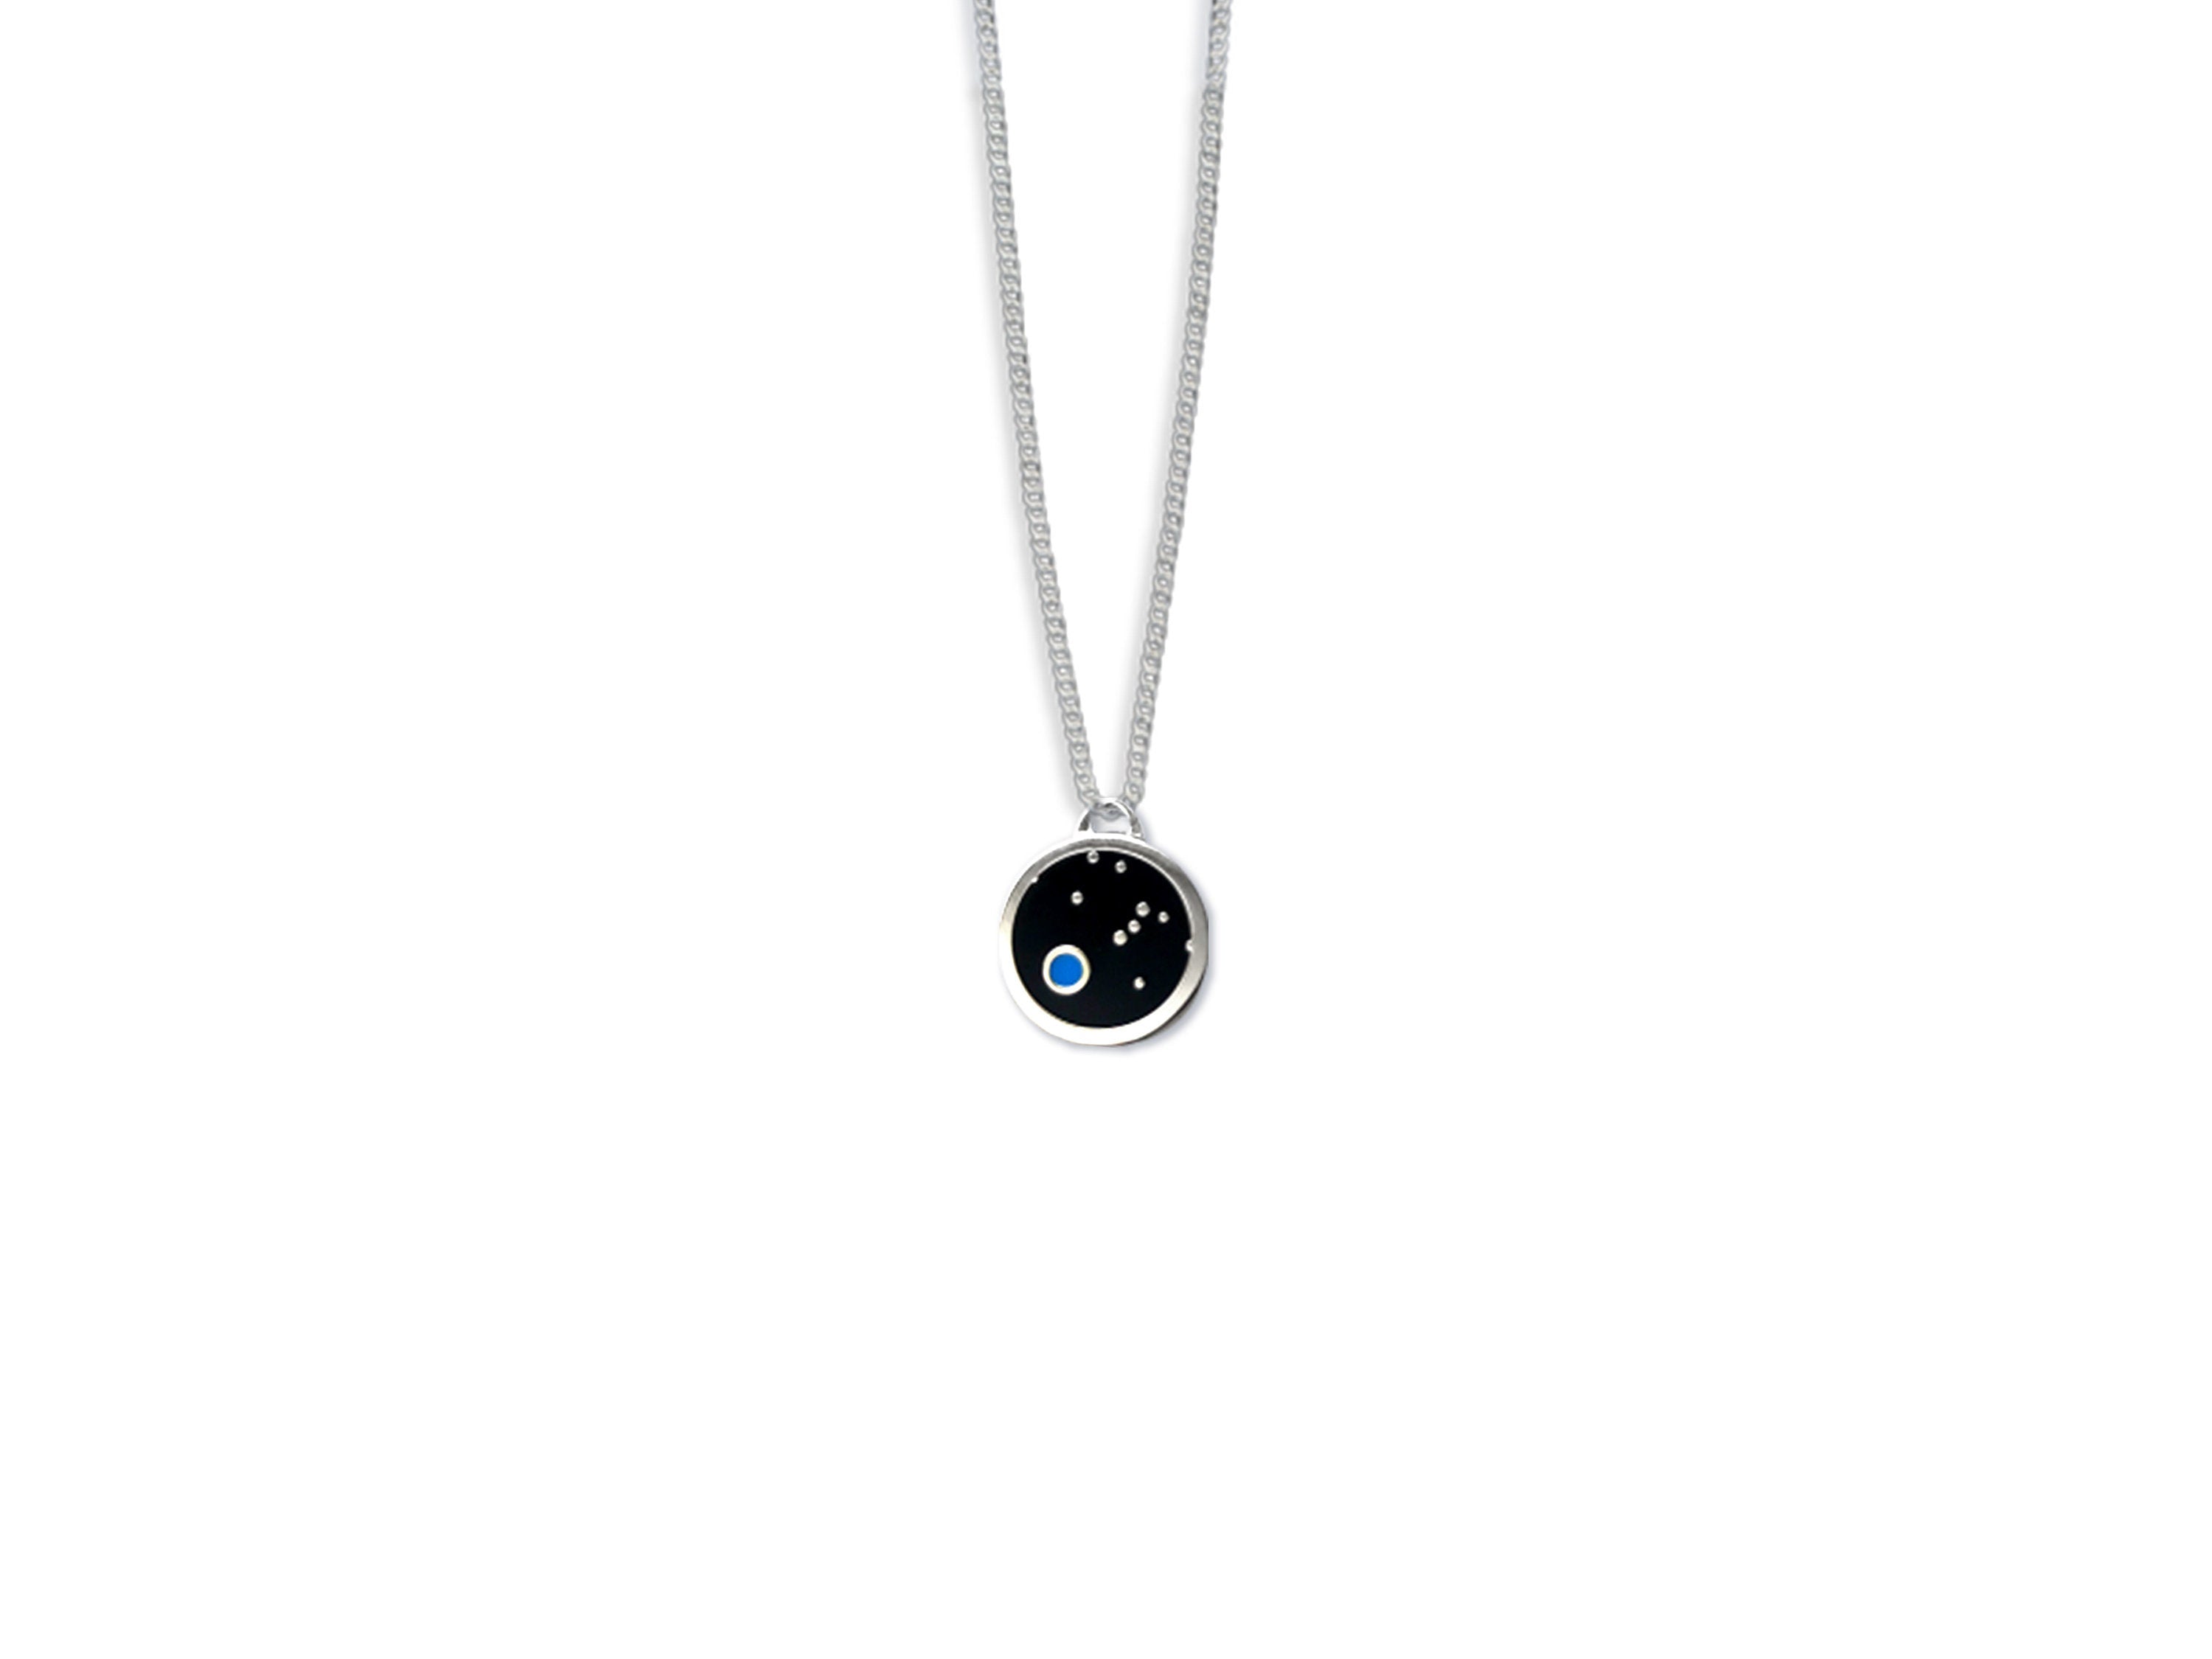 Pale Blue Dot Necklace - Astronomy / Space Pendant Necklace Gift - Celestial / Earth Jewelry